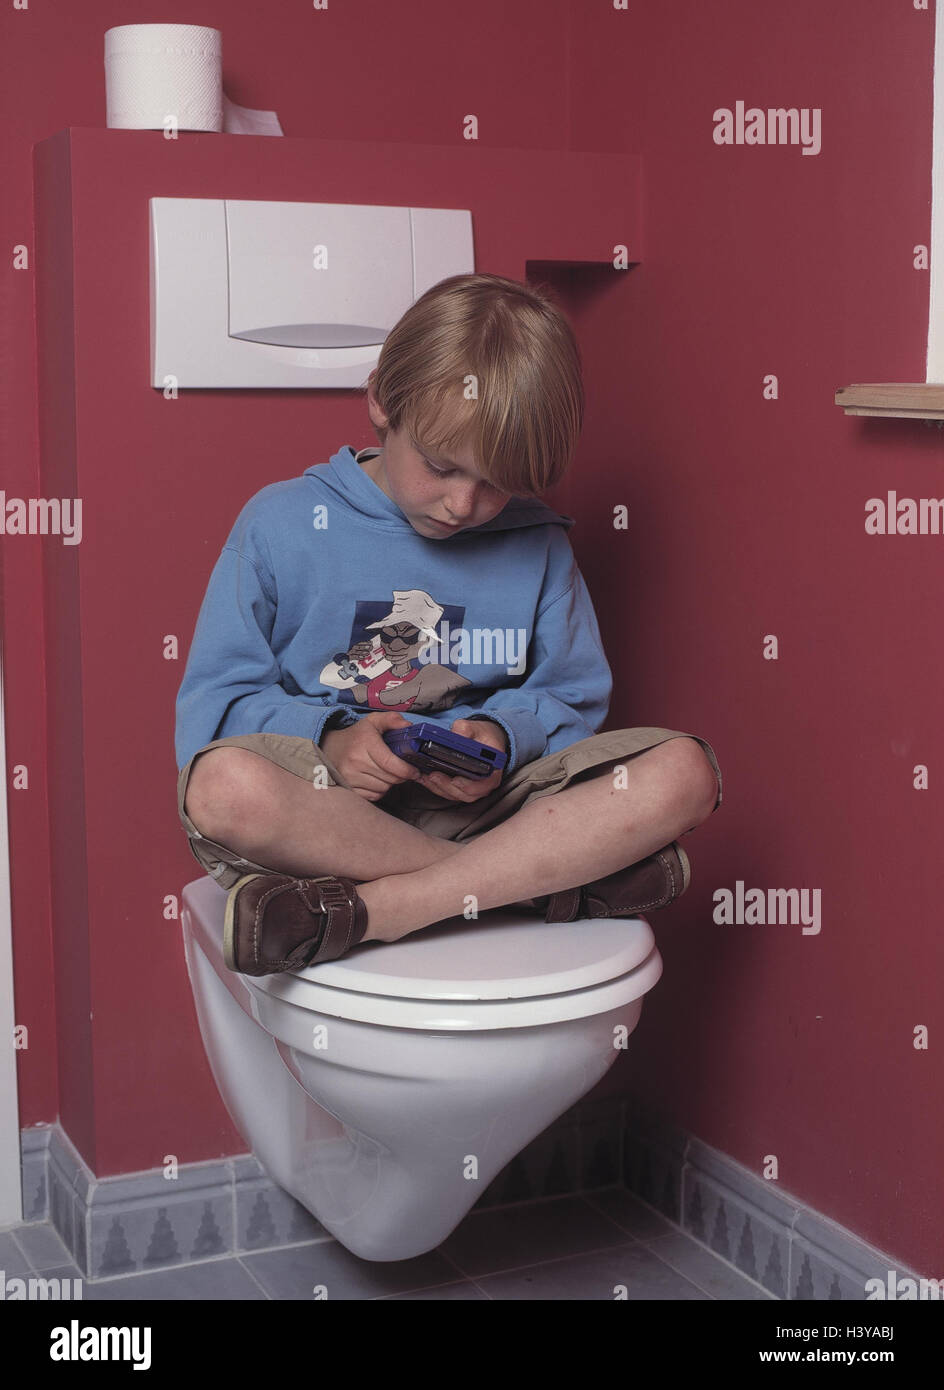 Toilet, boy, Gameboy, play, inside, bath, bathroom, child, 7 years, leisure time, childhood, game, gambling addiction, pouch computer, computer game, dissatisfied, discontent, concentrates, concentration Stock Photo